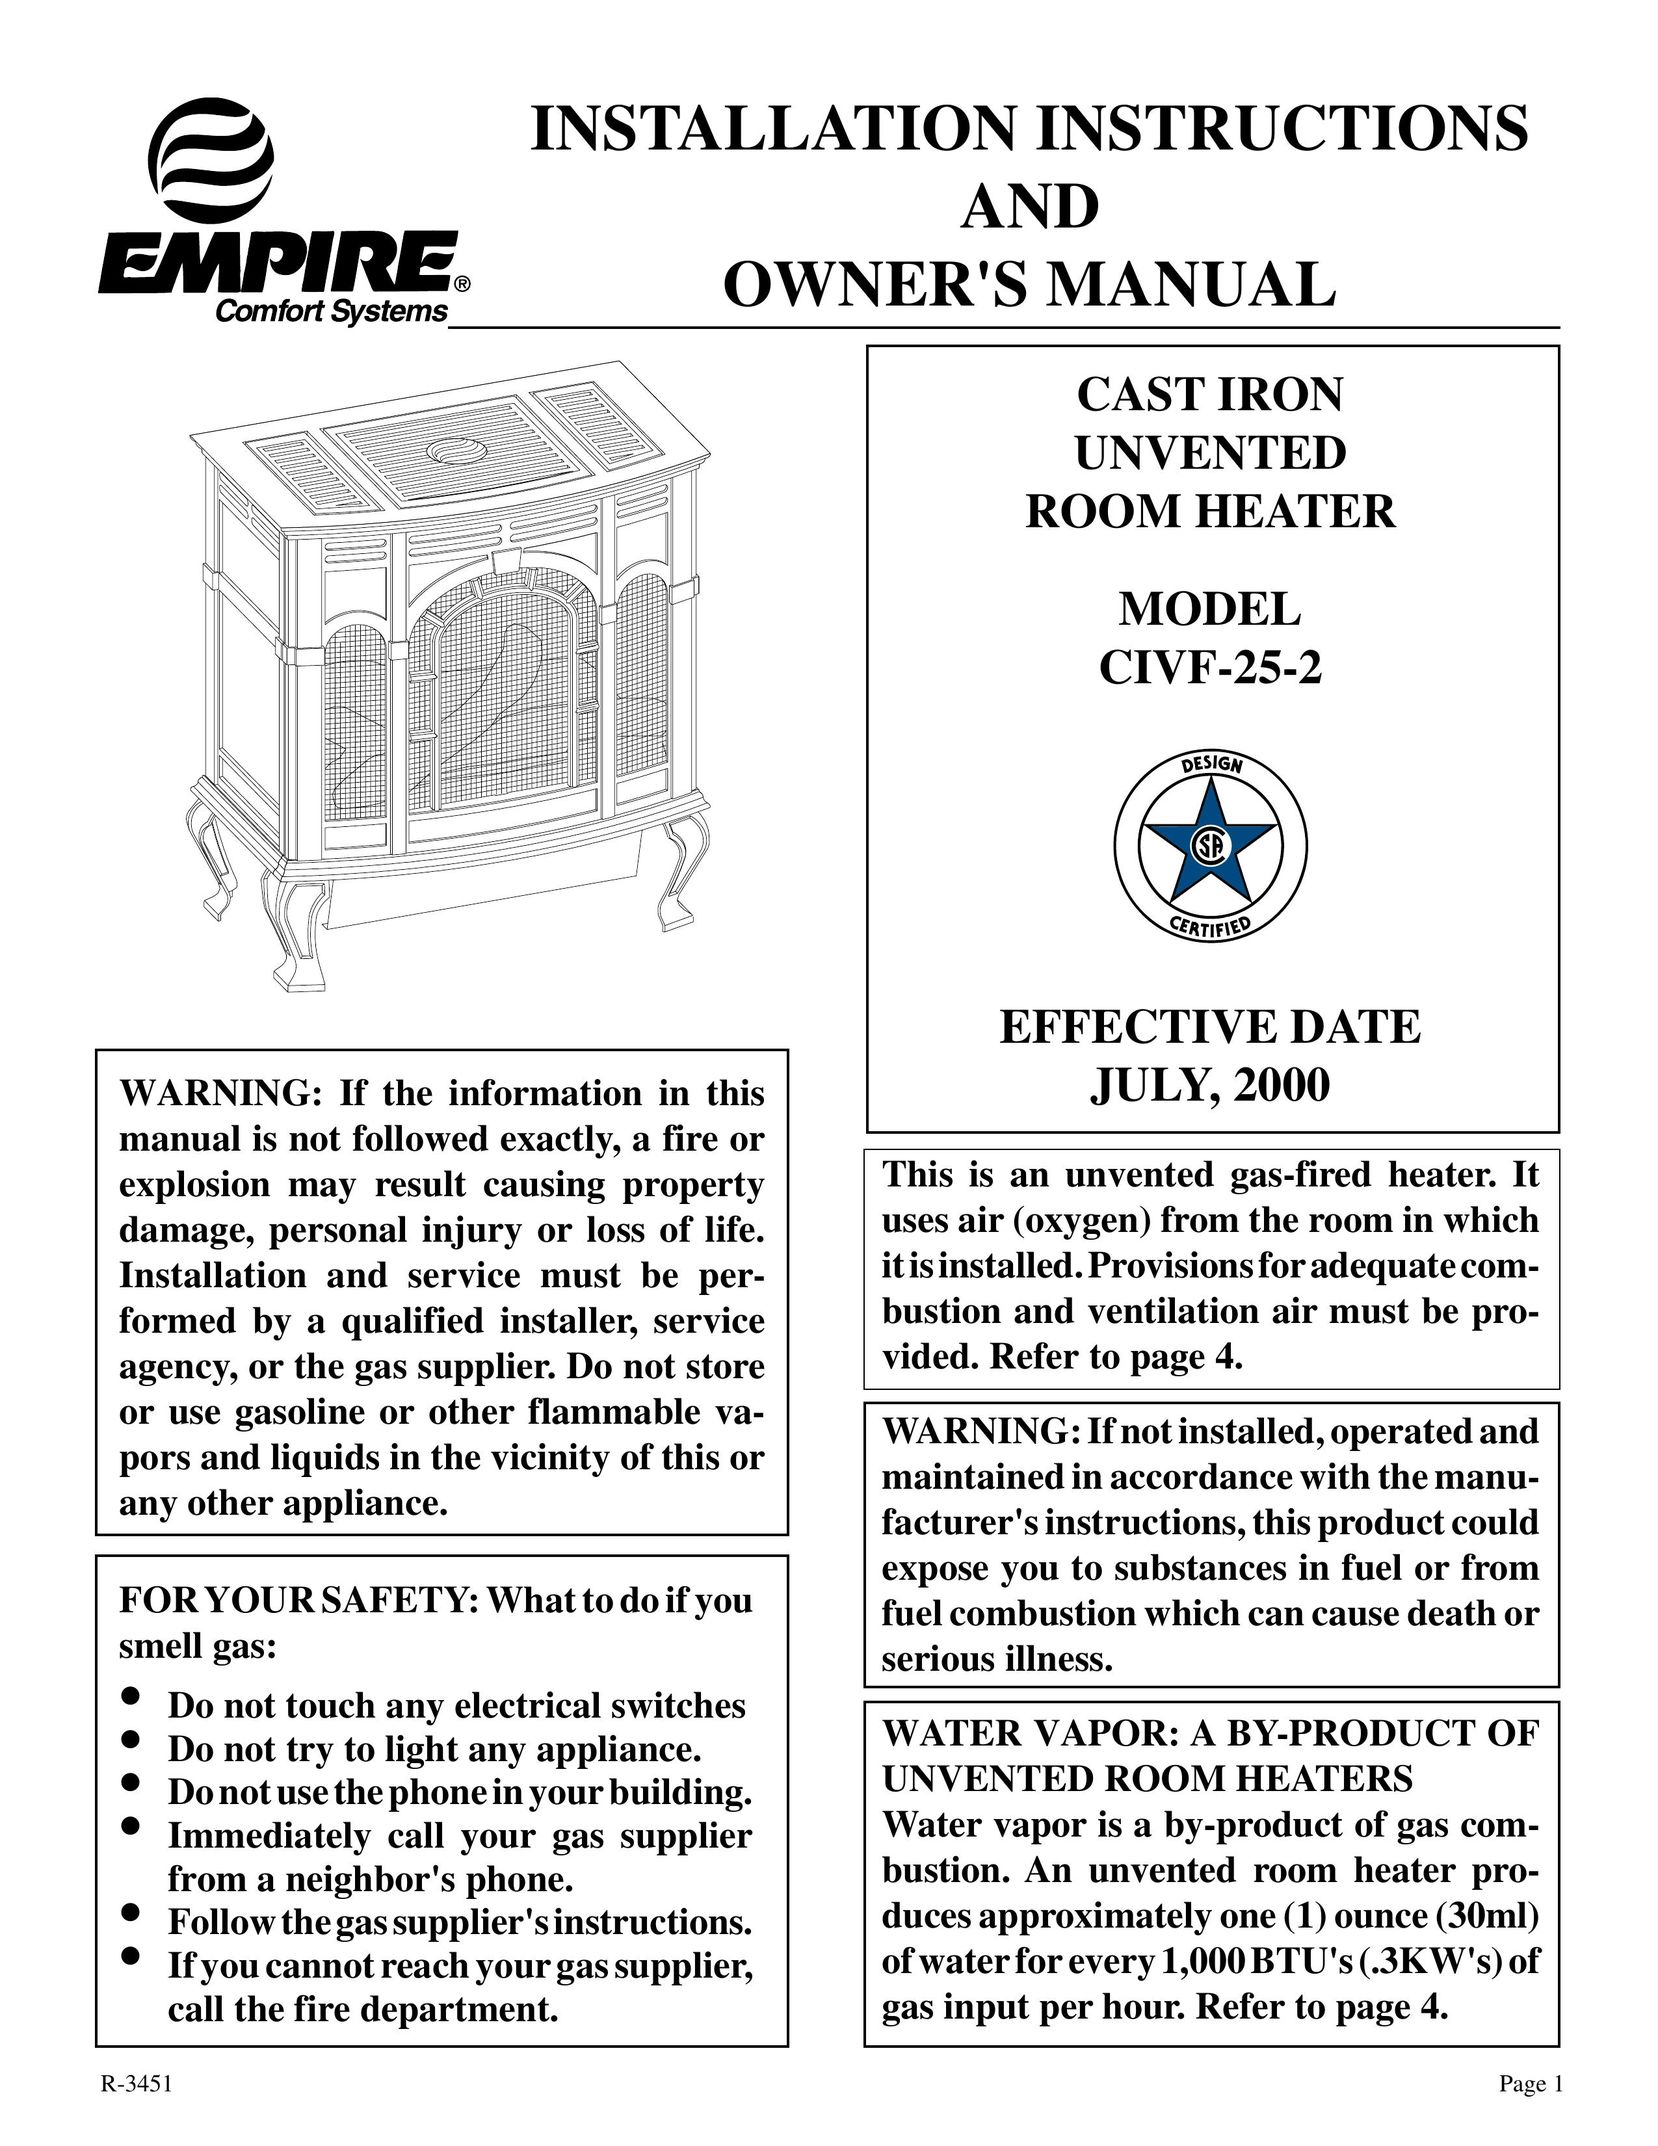 Empire Comfort Systems CIVF-25-2 Electric Heater User Manual